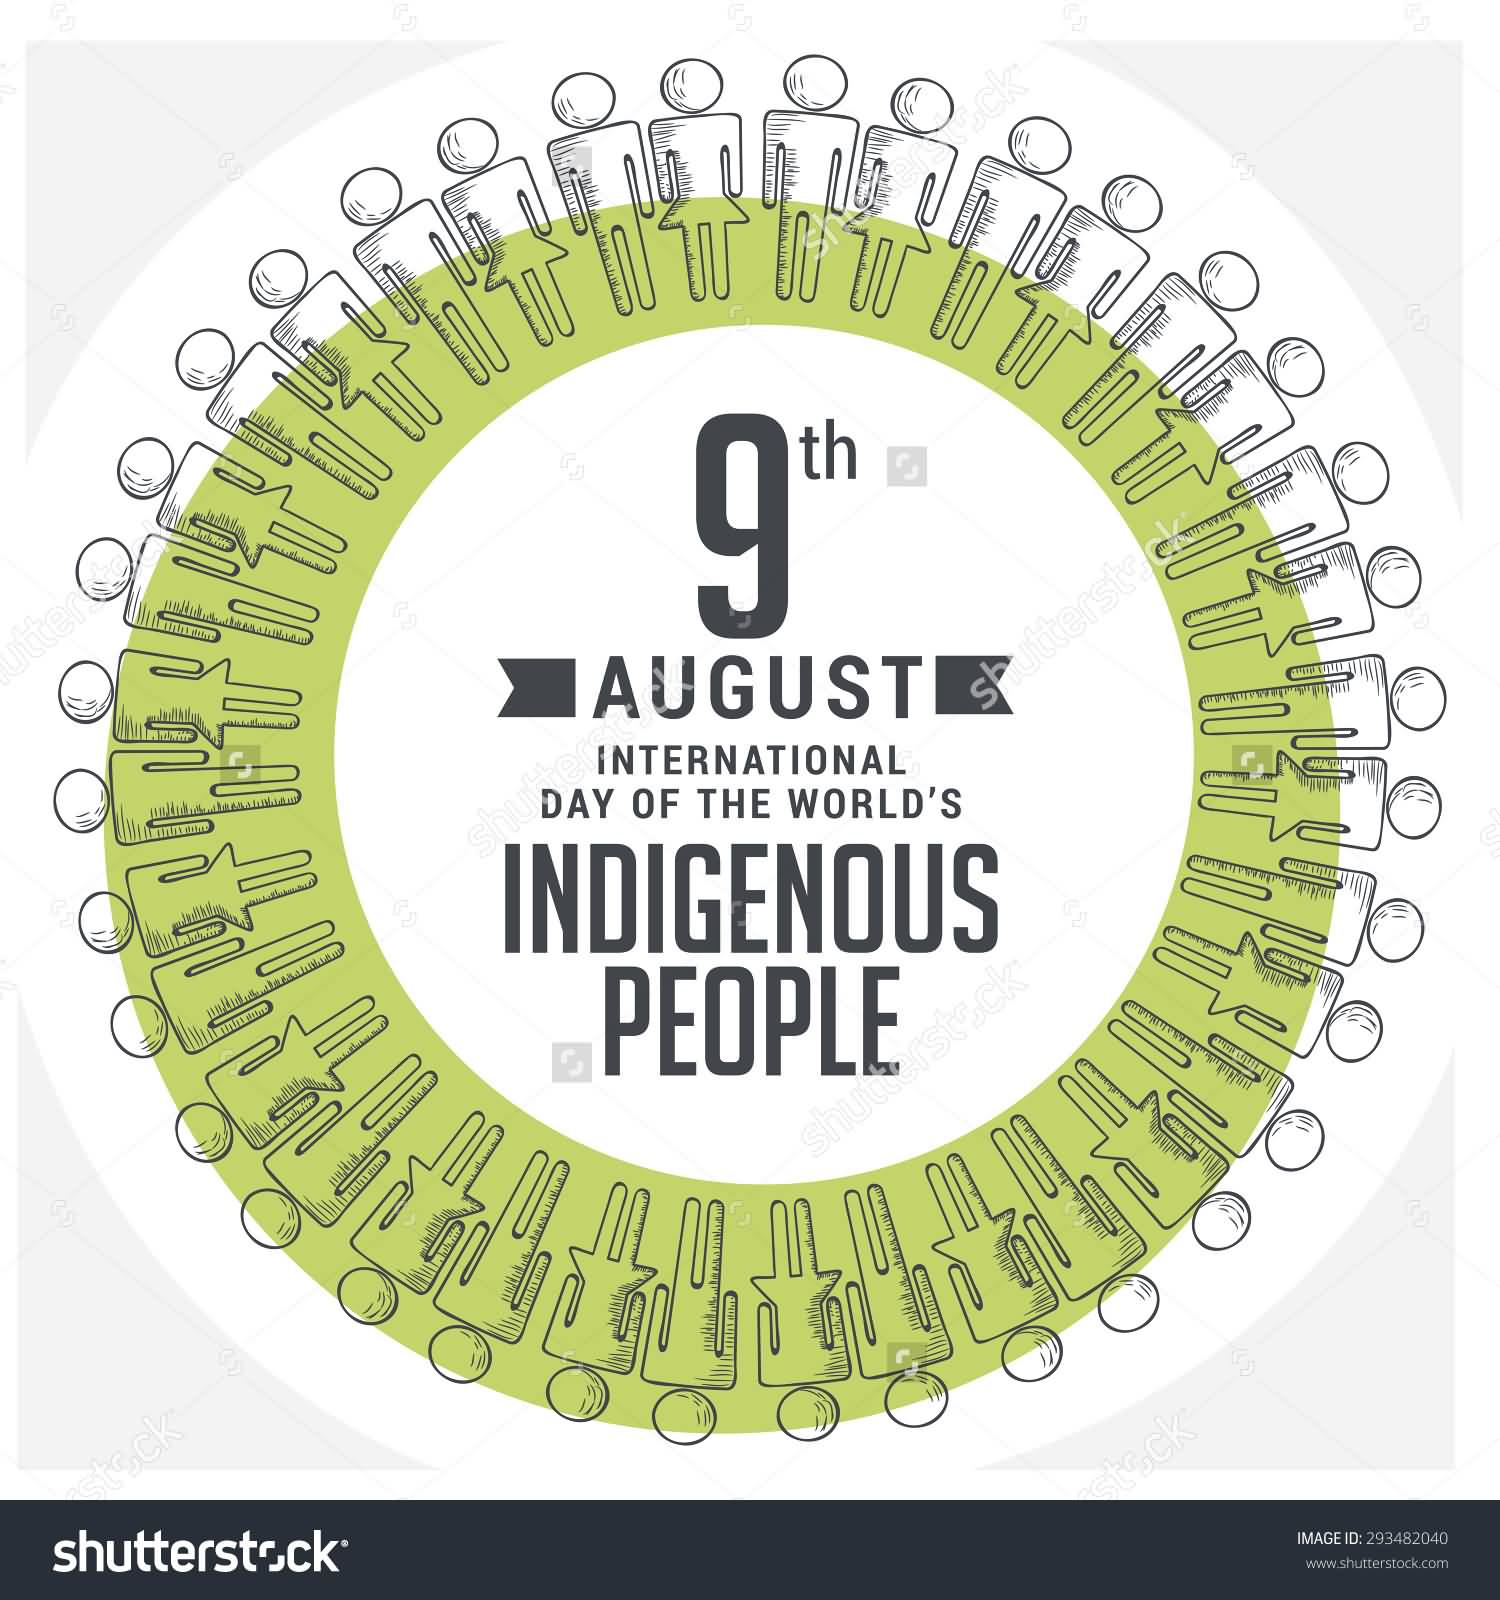 9th August International Day Of The World S Indigenous Peoples Illustration